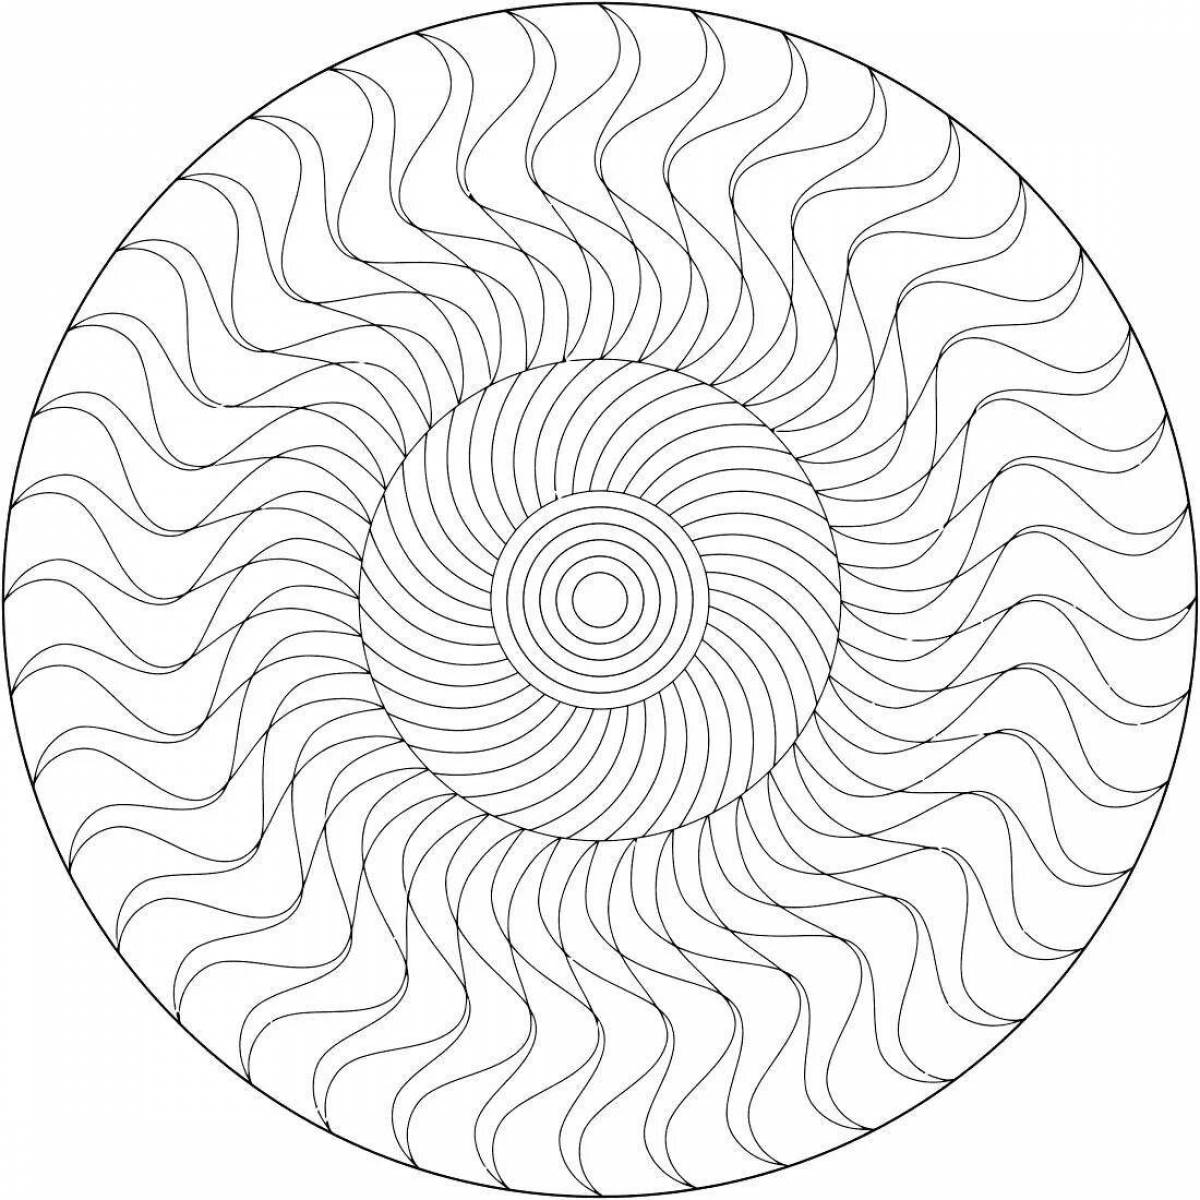 Coloring page dazzling circle with lines